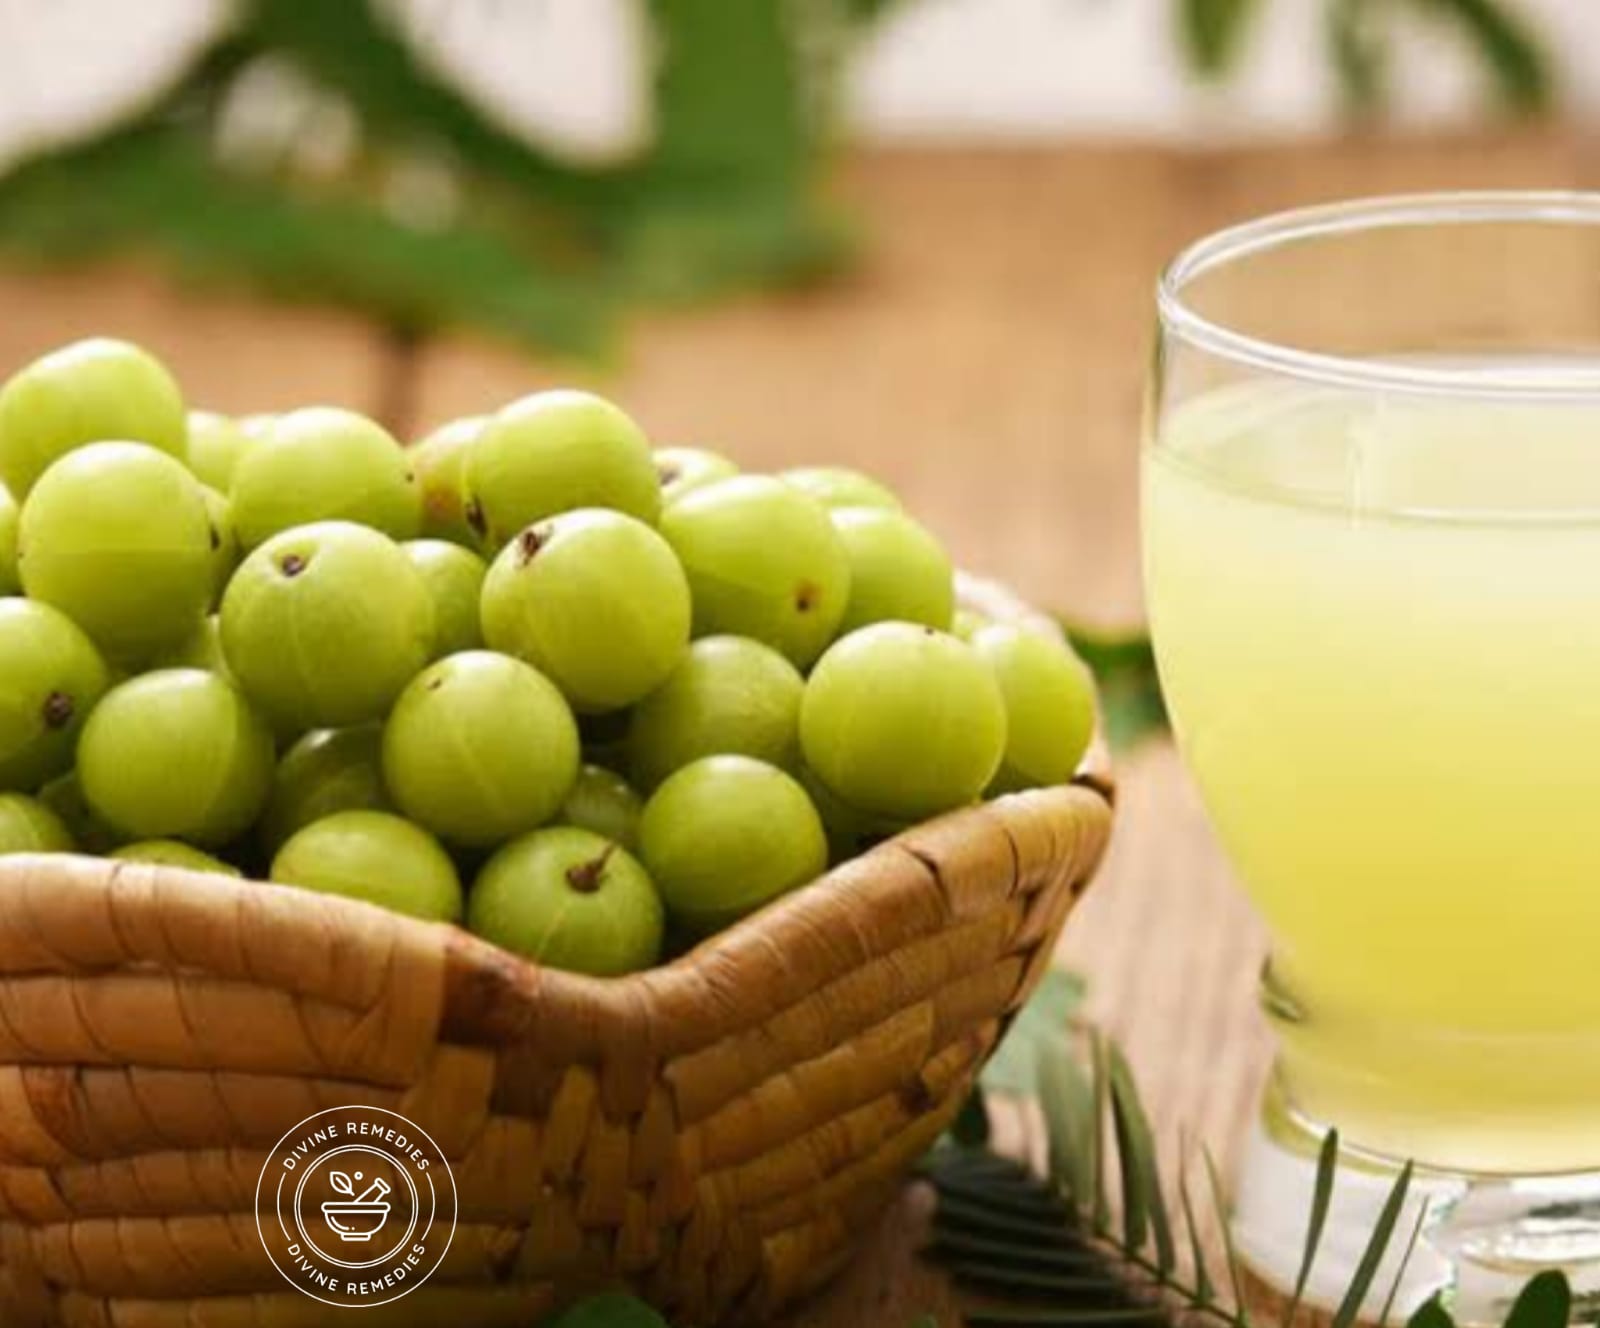 Have amla for PCOS